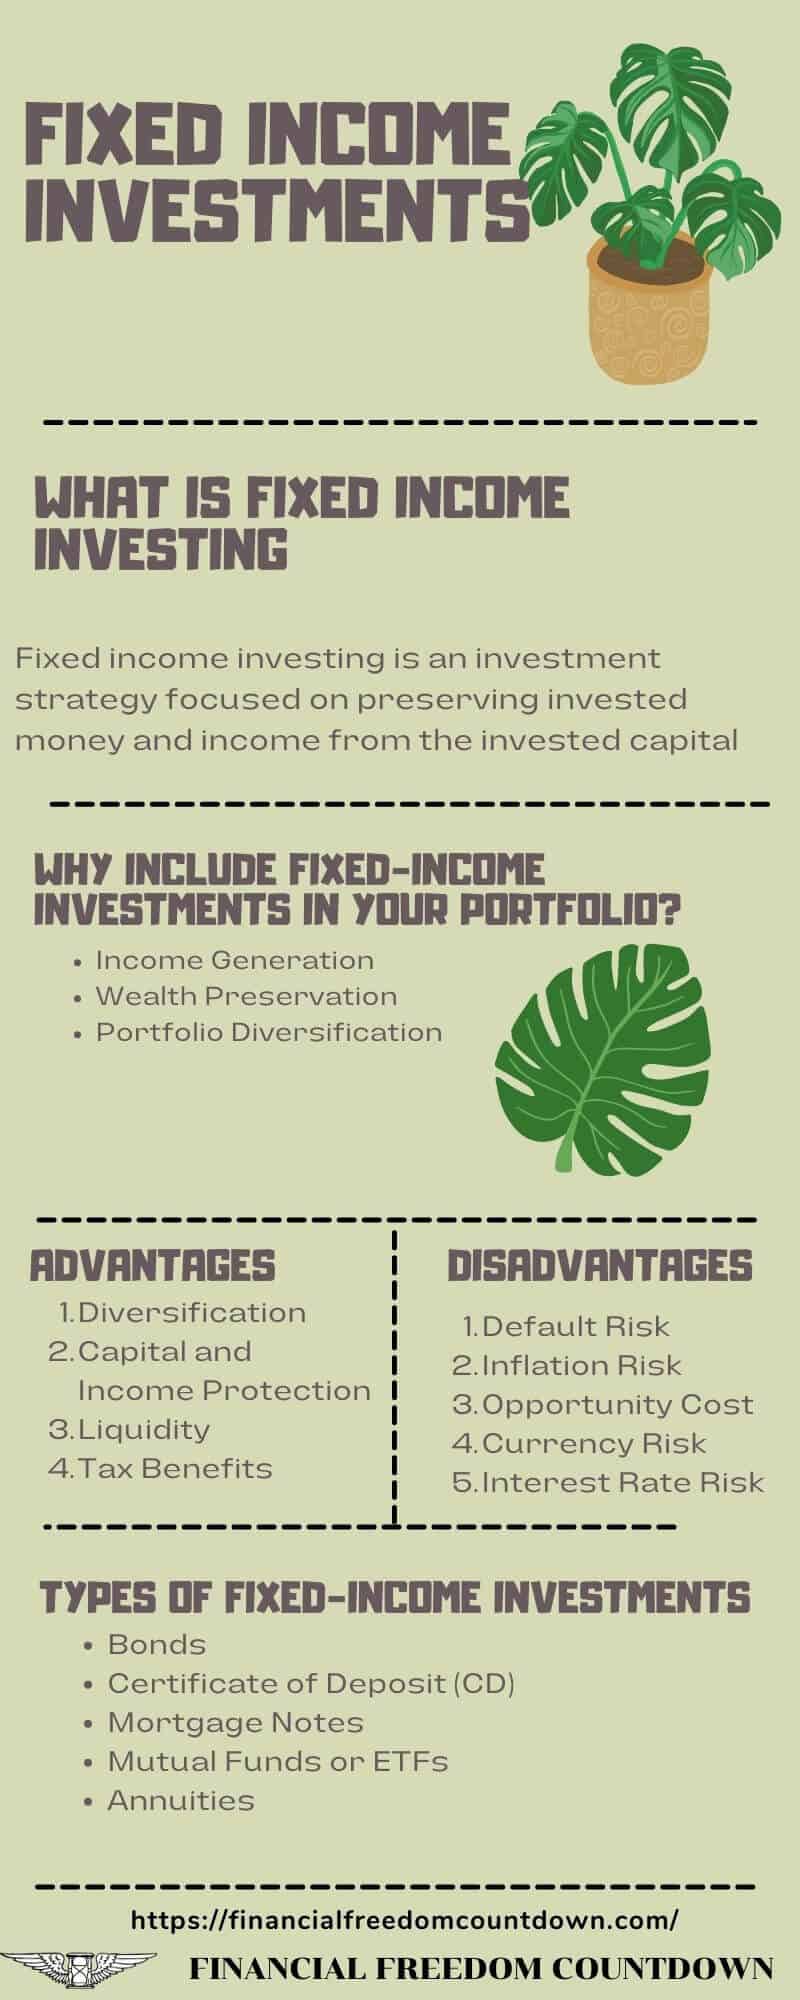 Fixed-Income-Investments-Pros-and-Cons-of-Fixed-Income-Investing